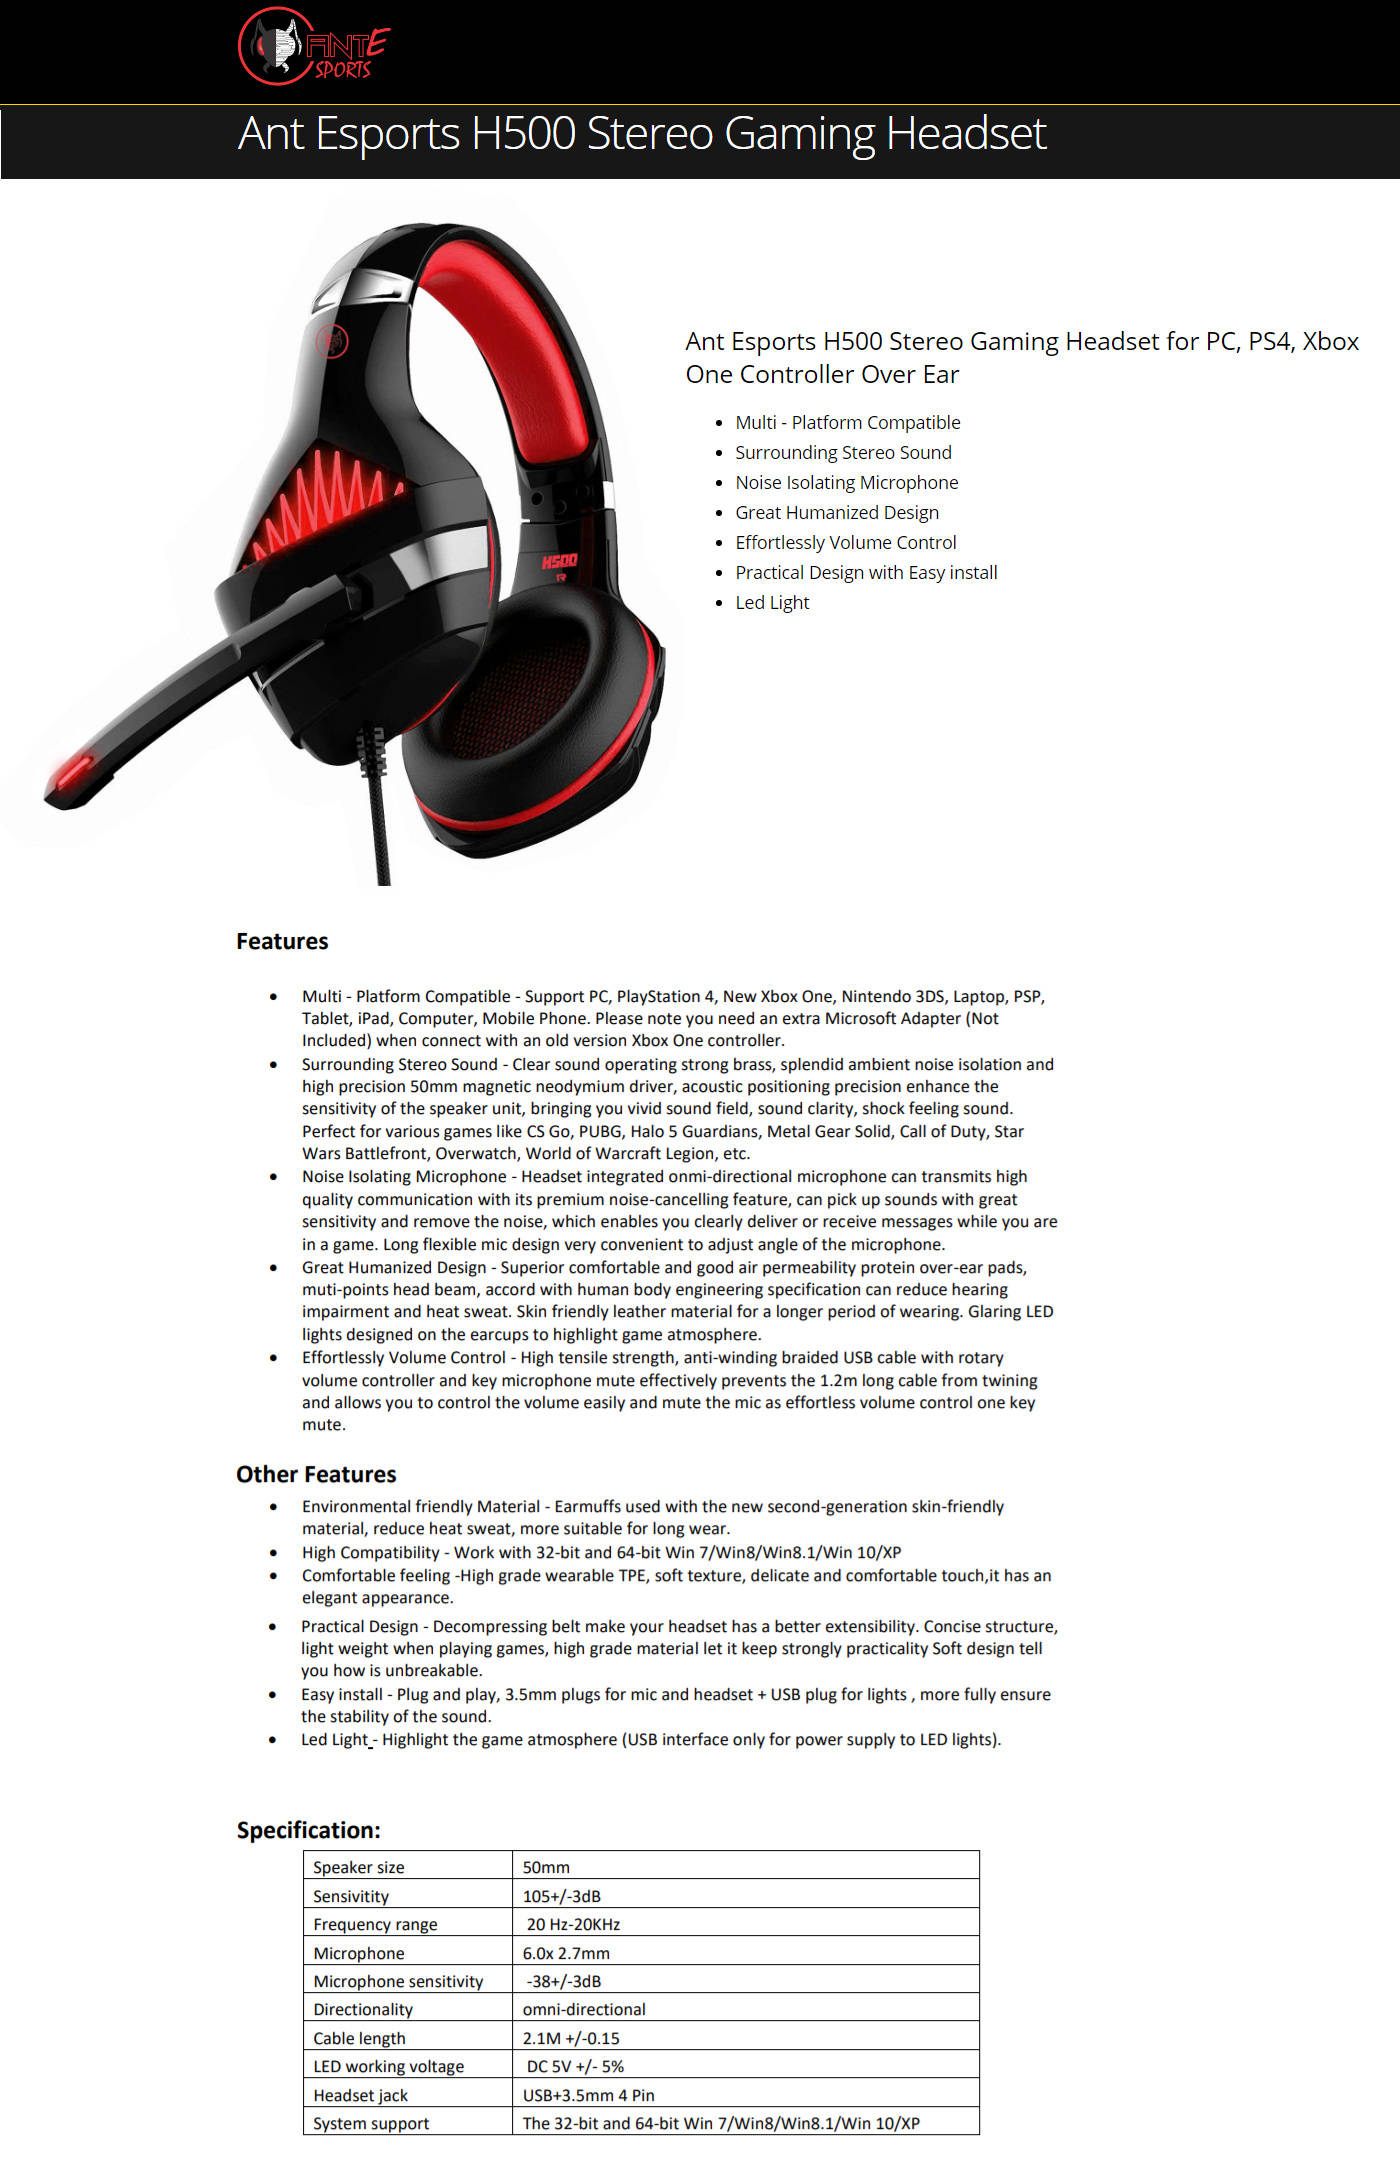  Buy Online Ant Esports H500 Stereo Gaming Headset for PC (Black-Red)